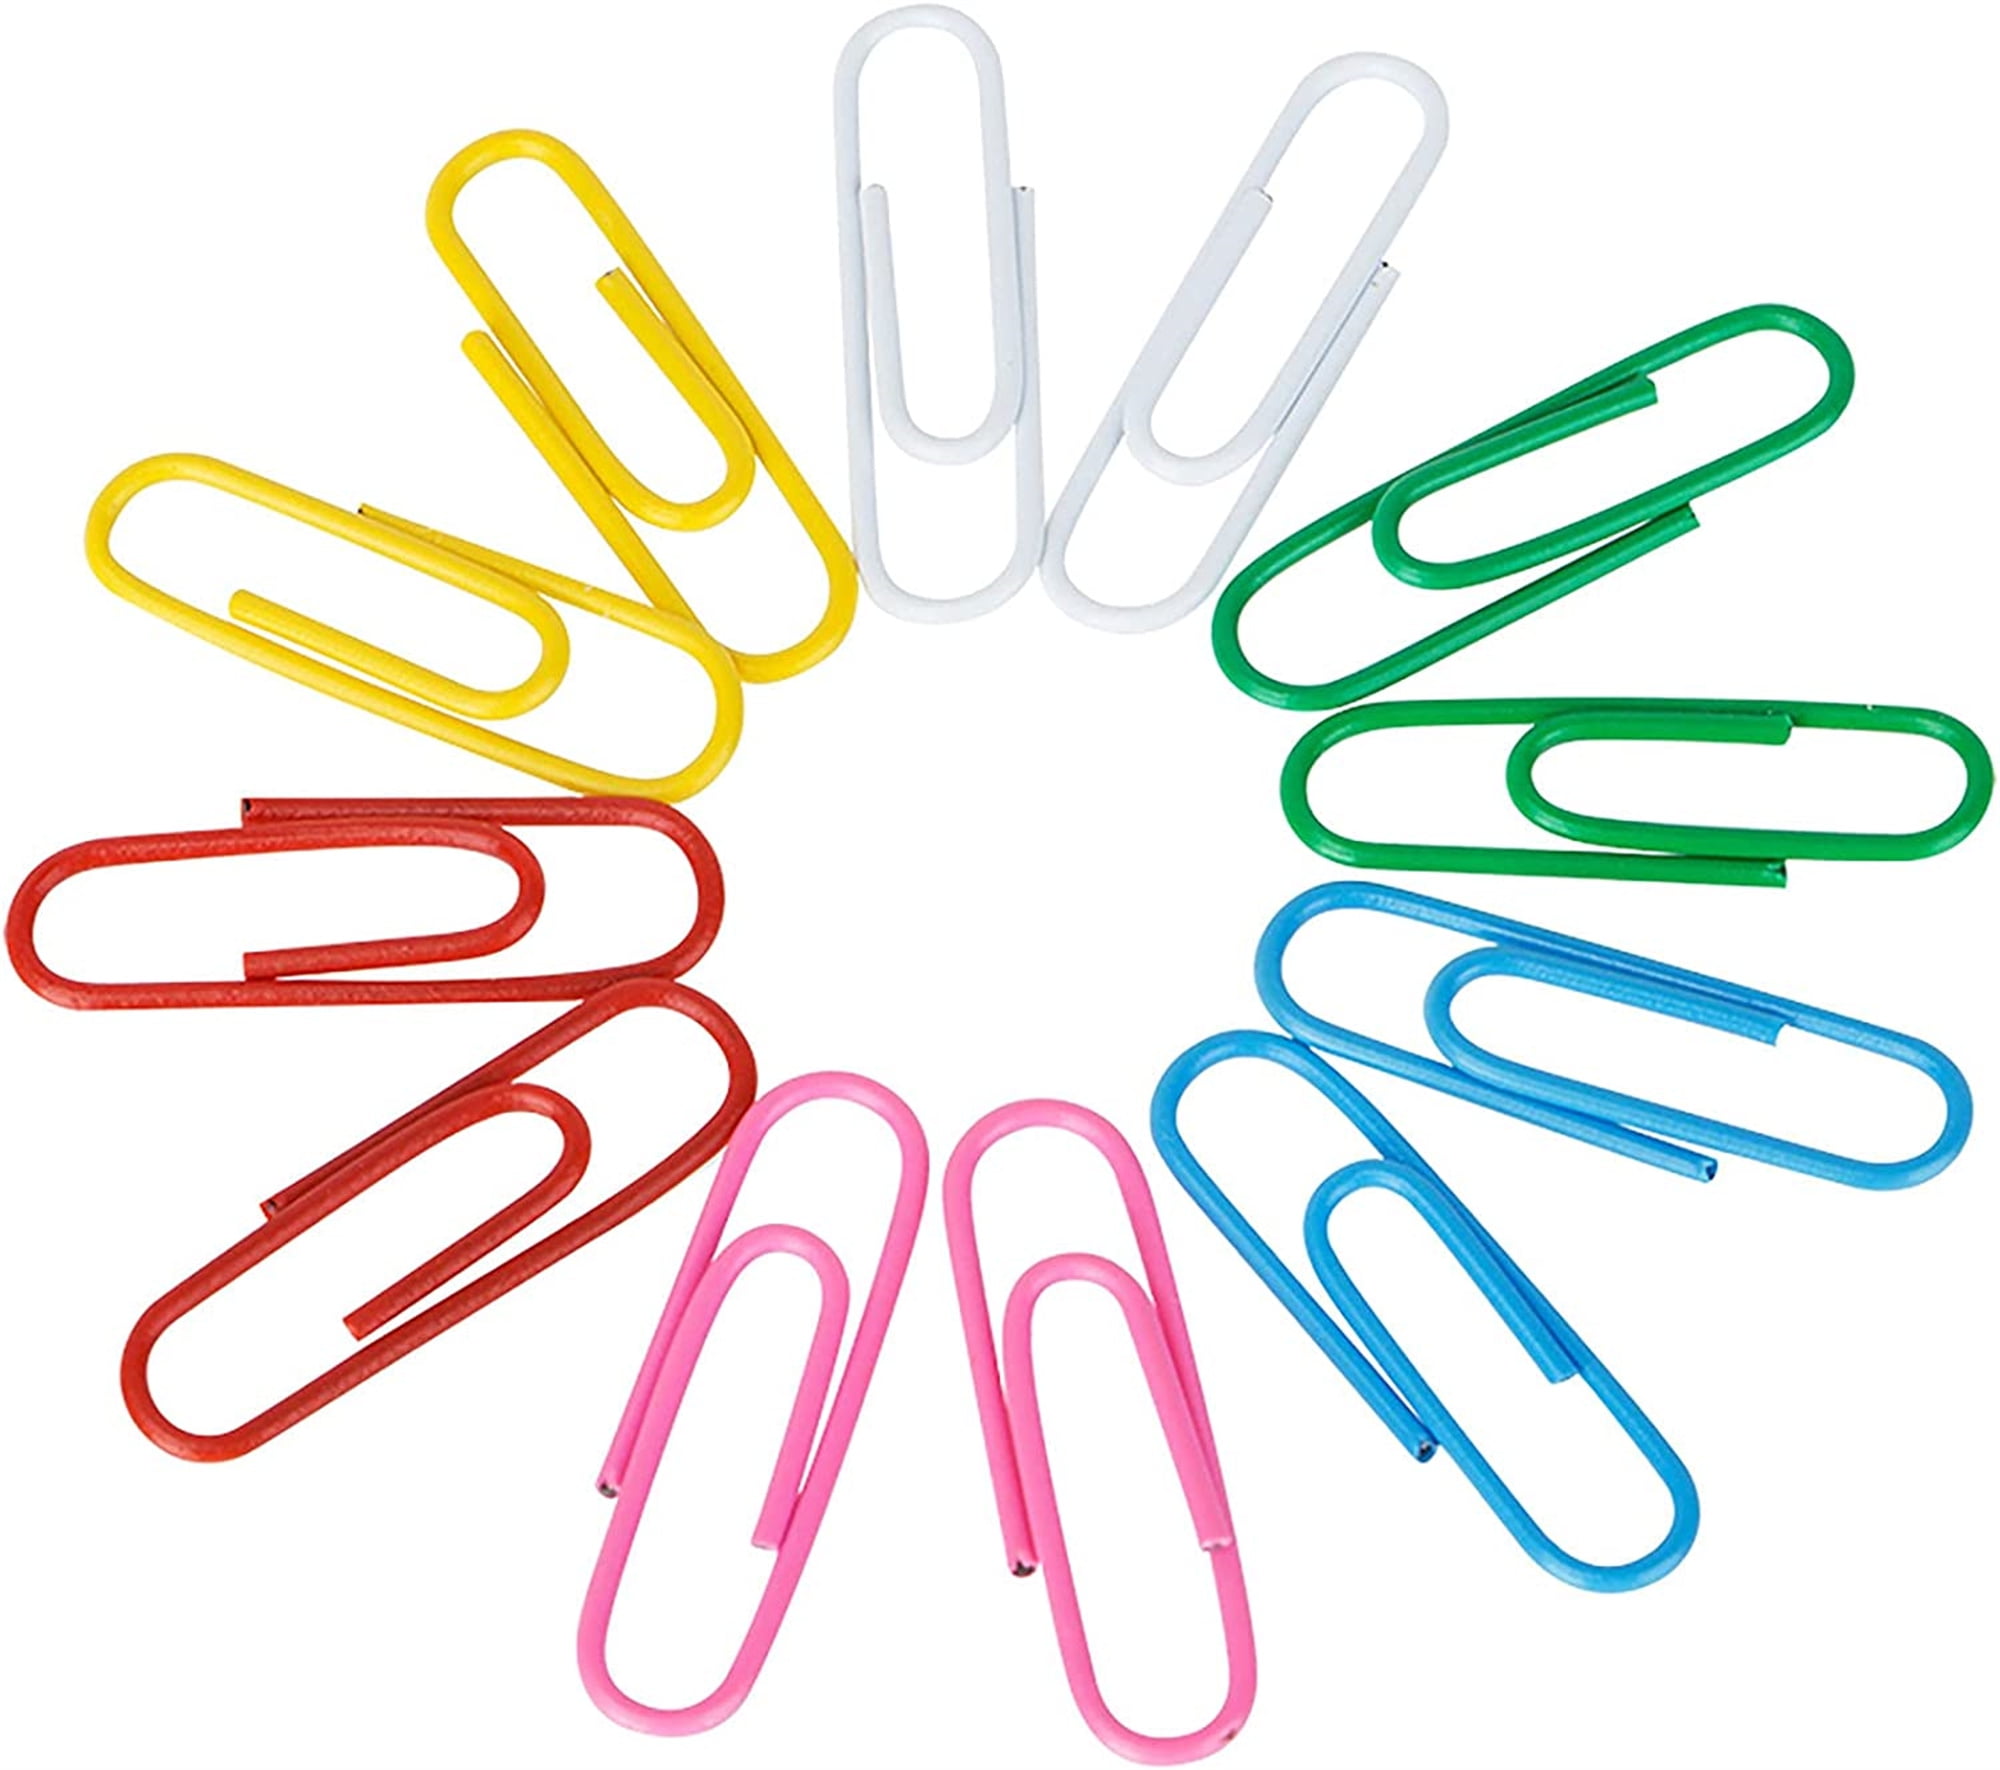 Yarlung 900 Pieces 2 Inch Jumbo Paper Clips, Vinyl Coated Large Paperclips  for Office, School Document Organizing, Non-Skid, 6 Colors